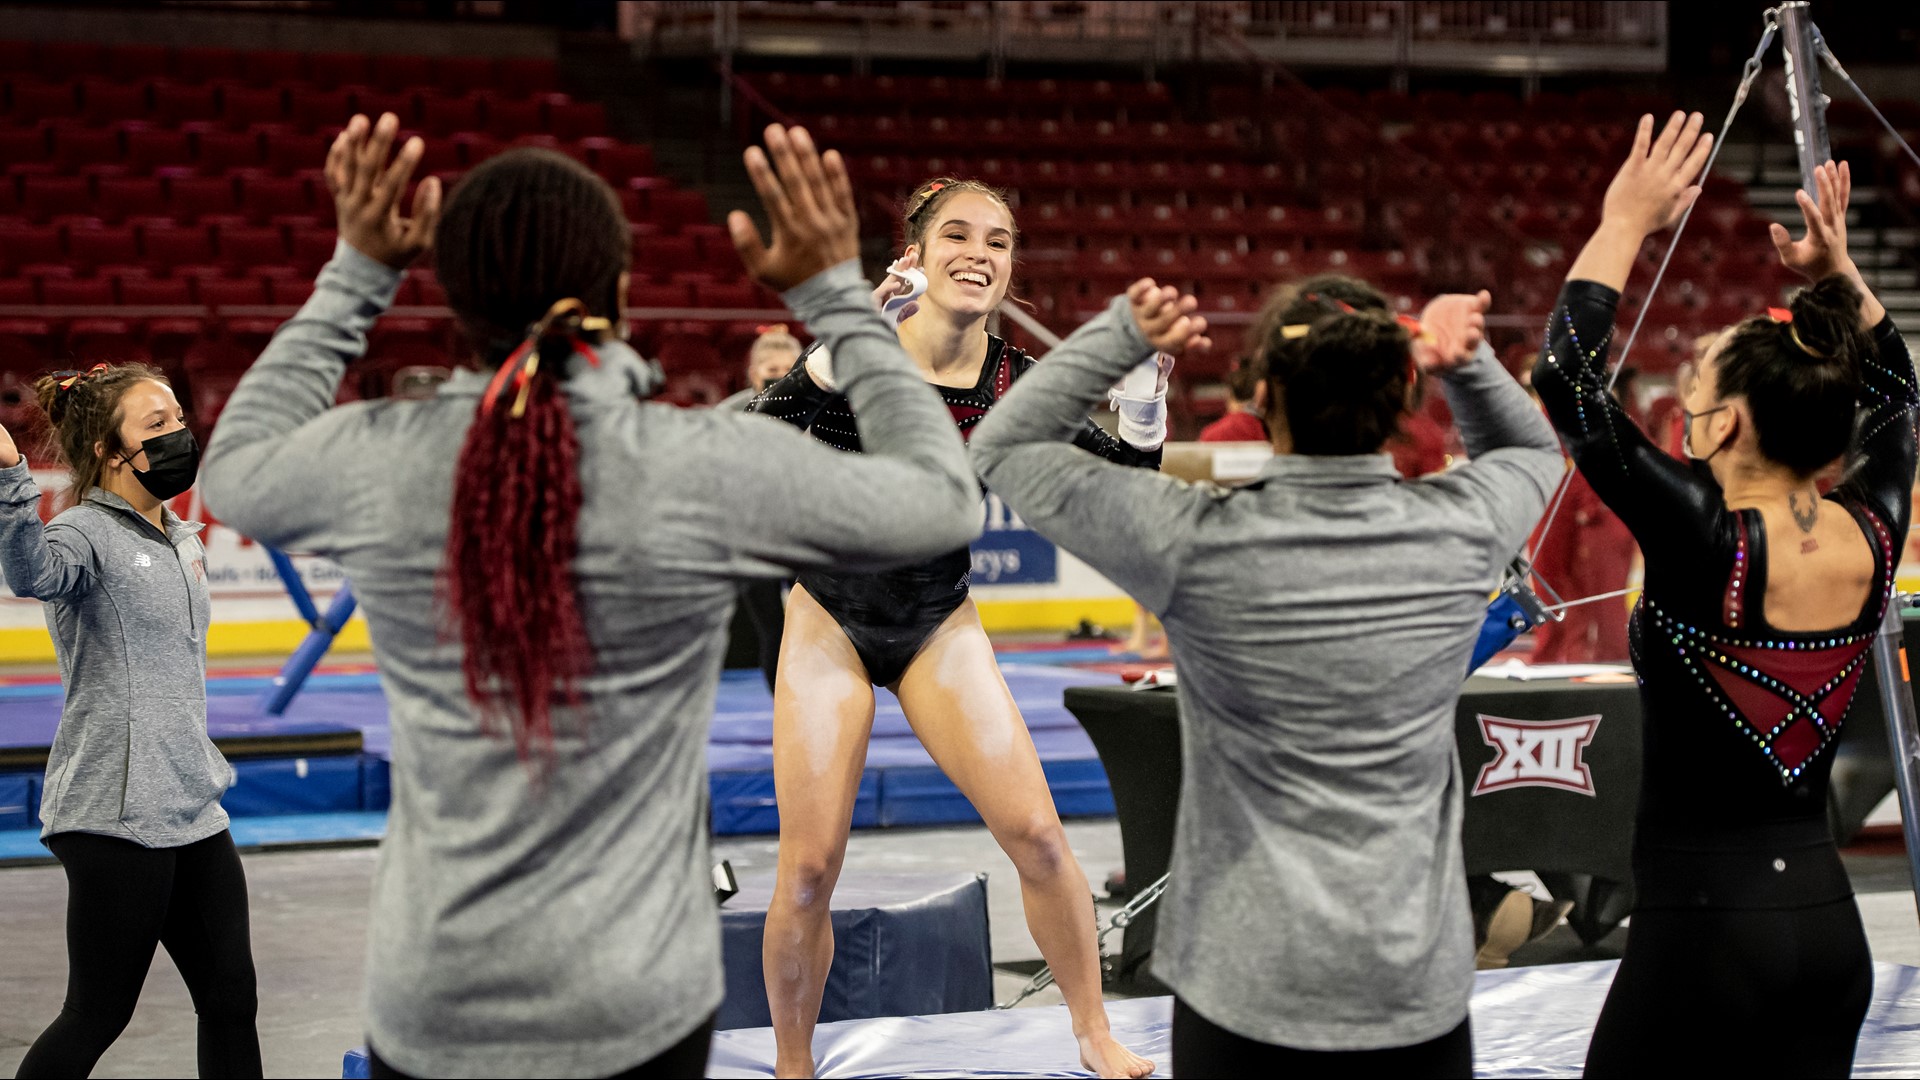 Season preparation begins for the Denver Pioneers before they even touch the mats. The gymnasts meet with a clinical and sports psychologist regularly.